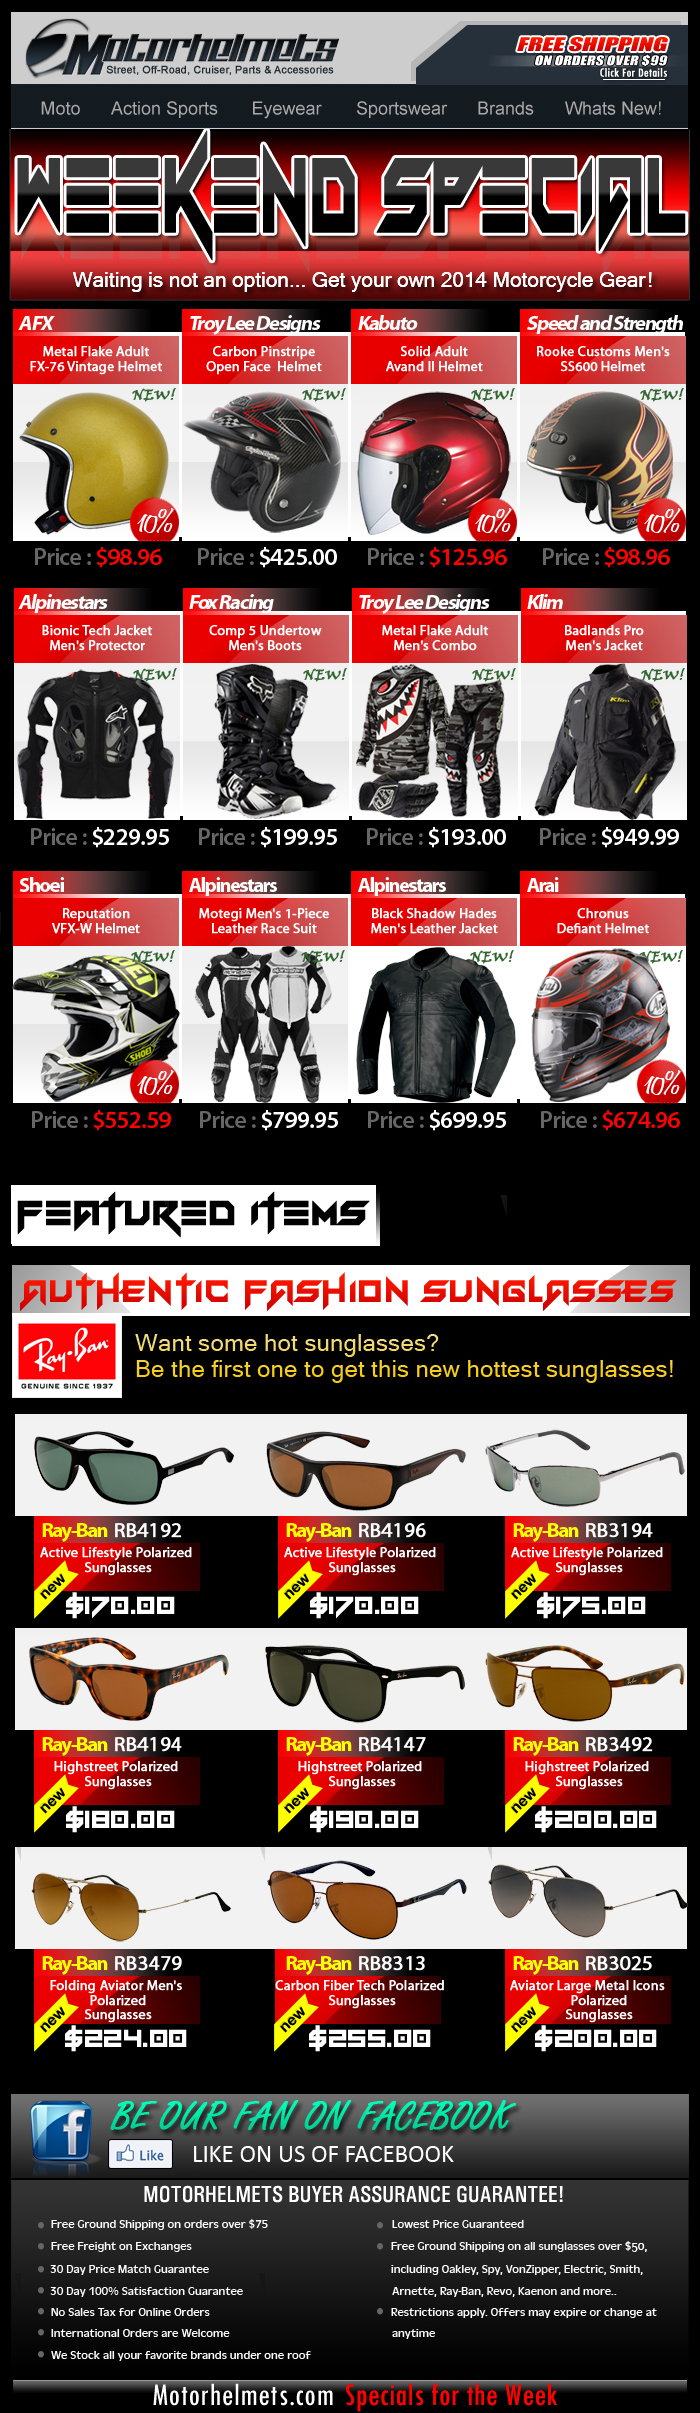 Now Available..2014 Gear and Apparel from Fox, Shoei, A-Stars and more!